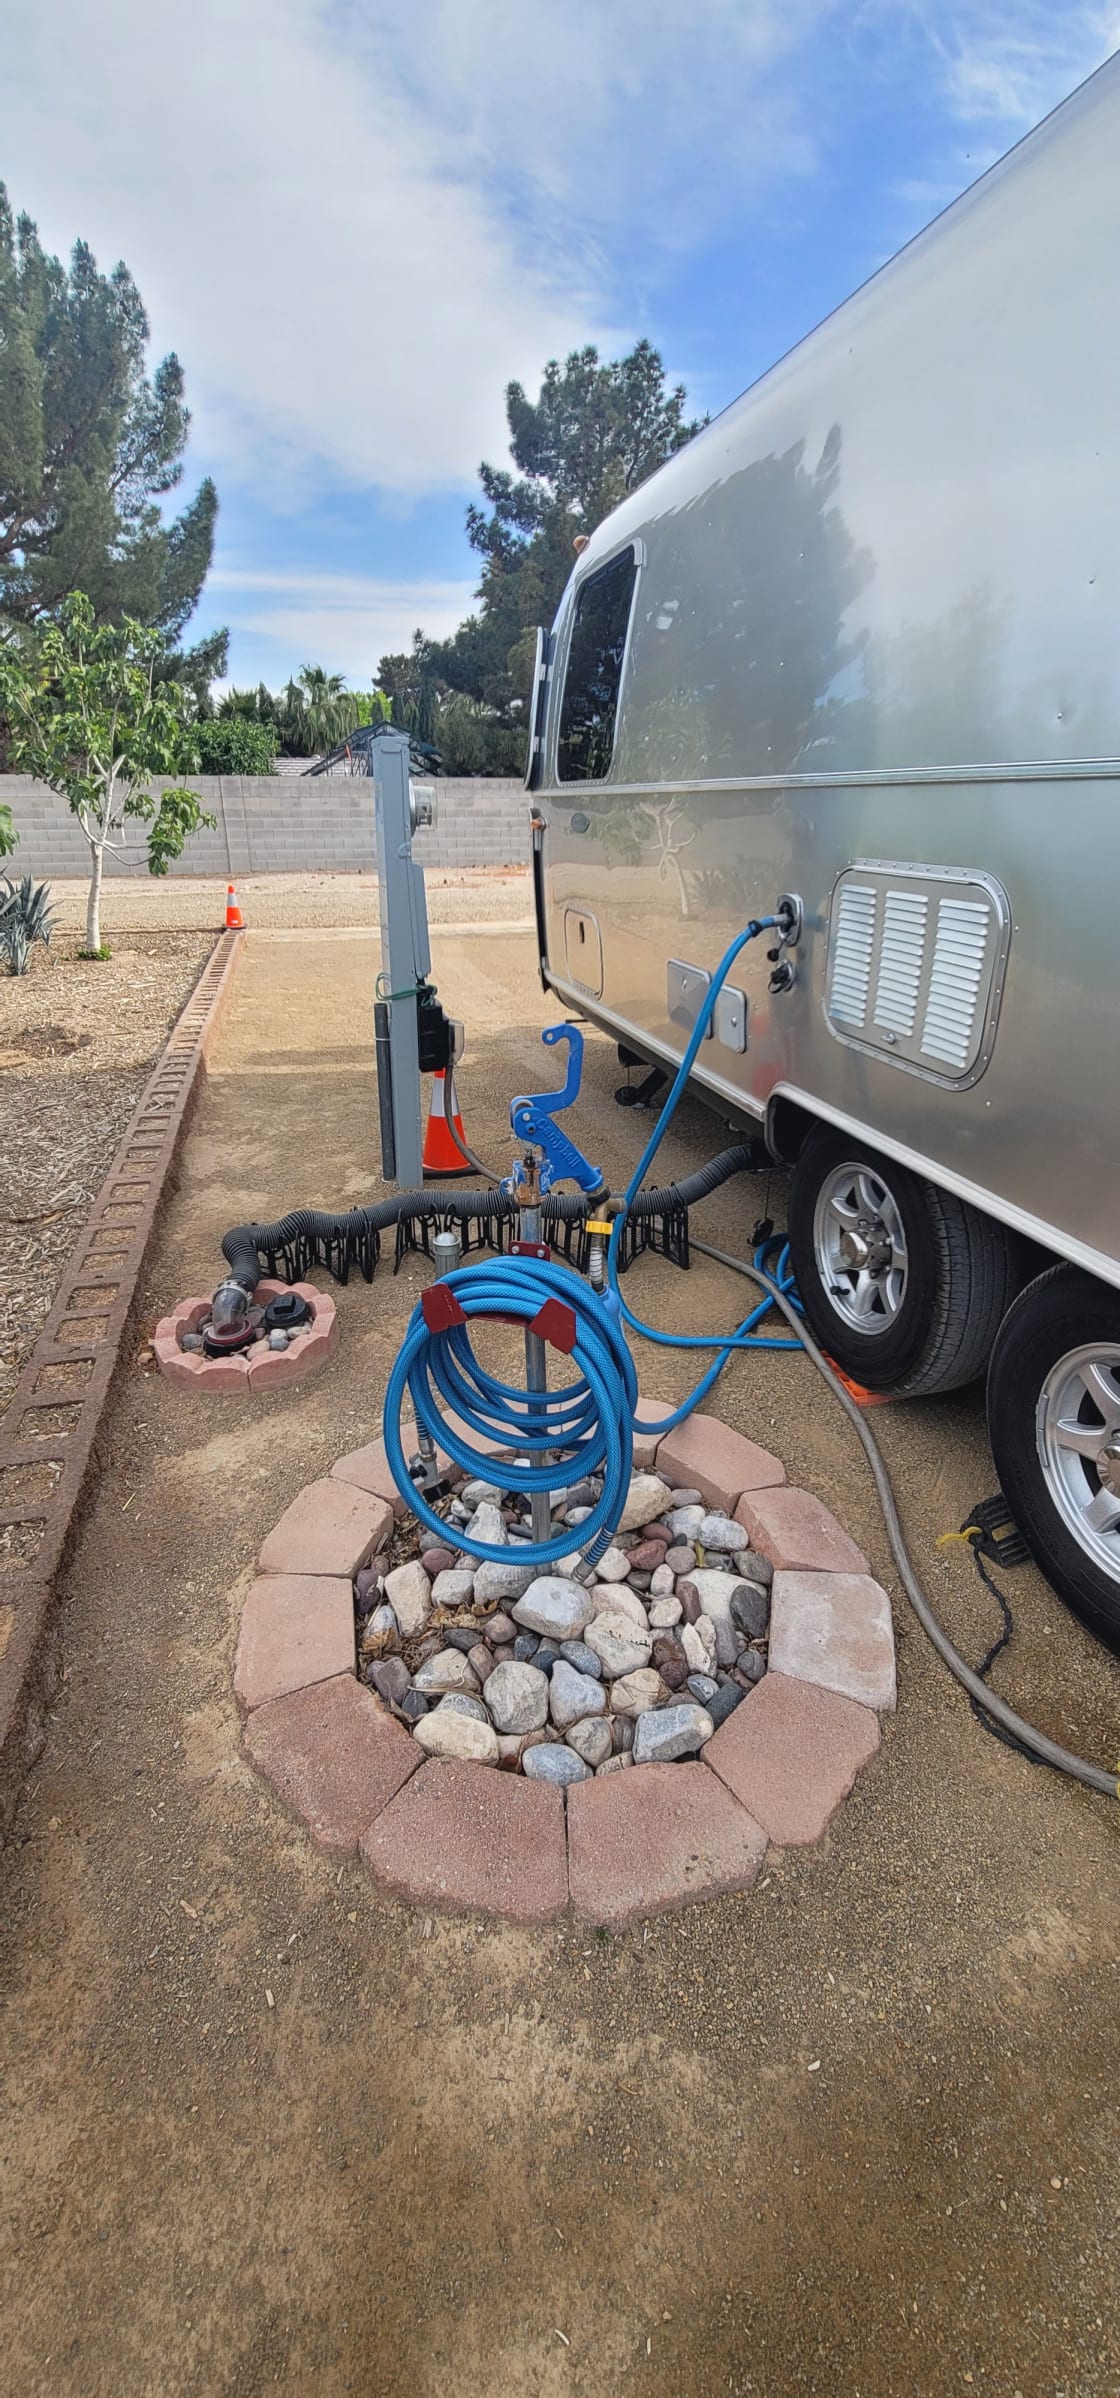 50 Amp selc, water, and sewer